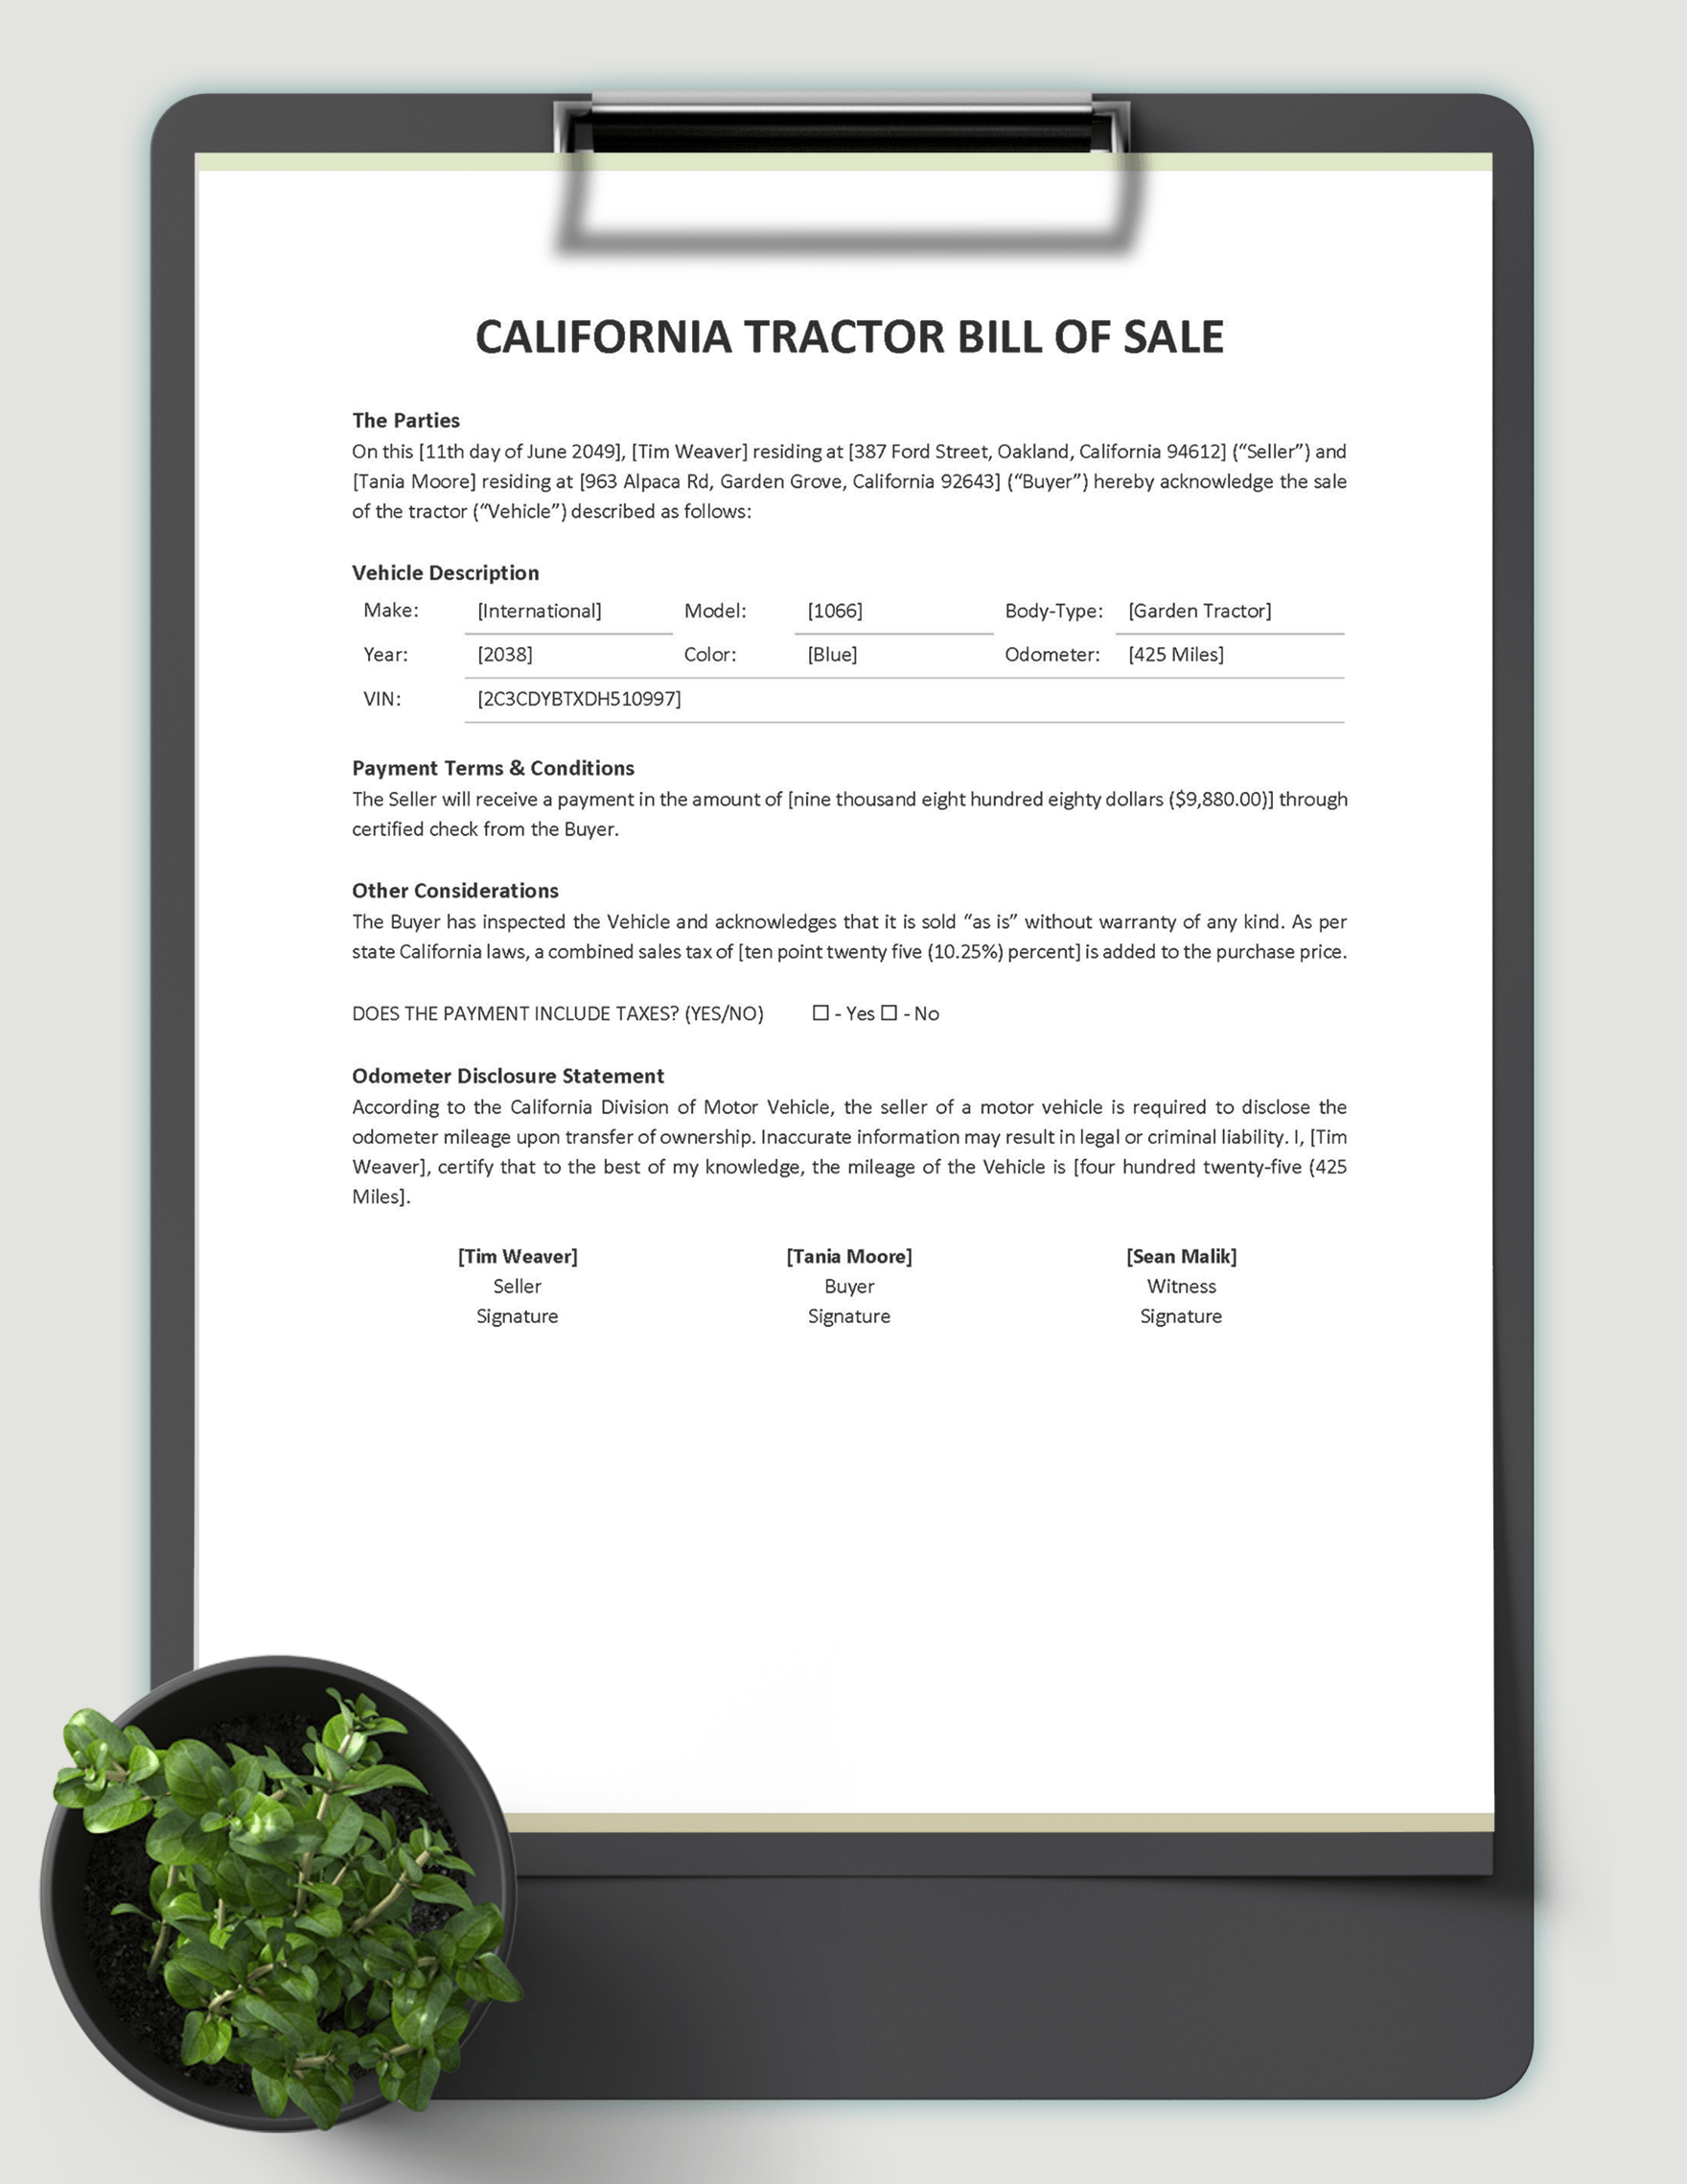 California Tractor Bill of Sale Form Template